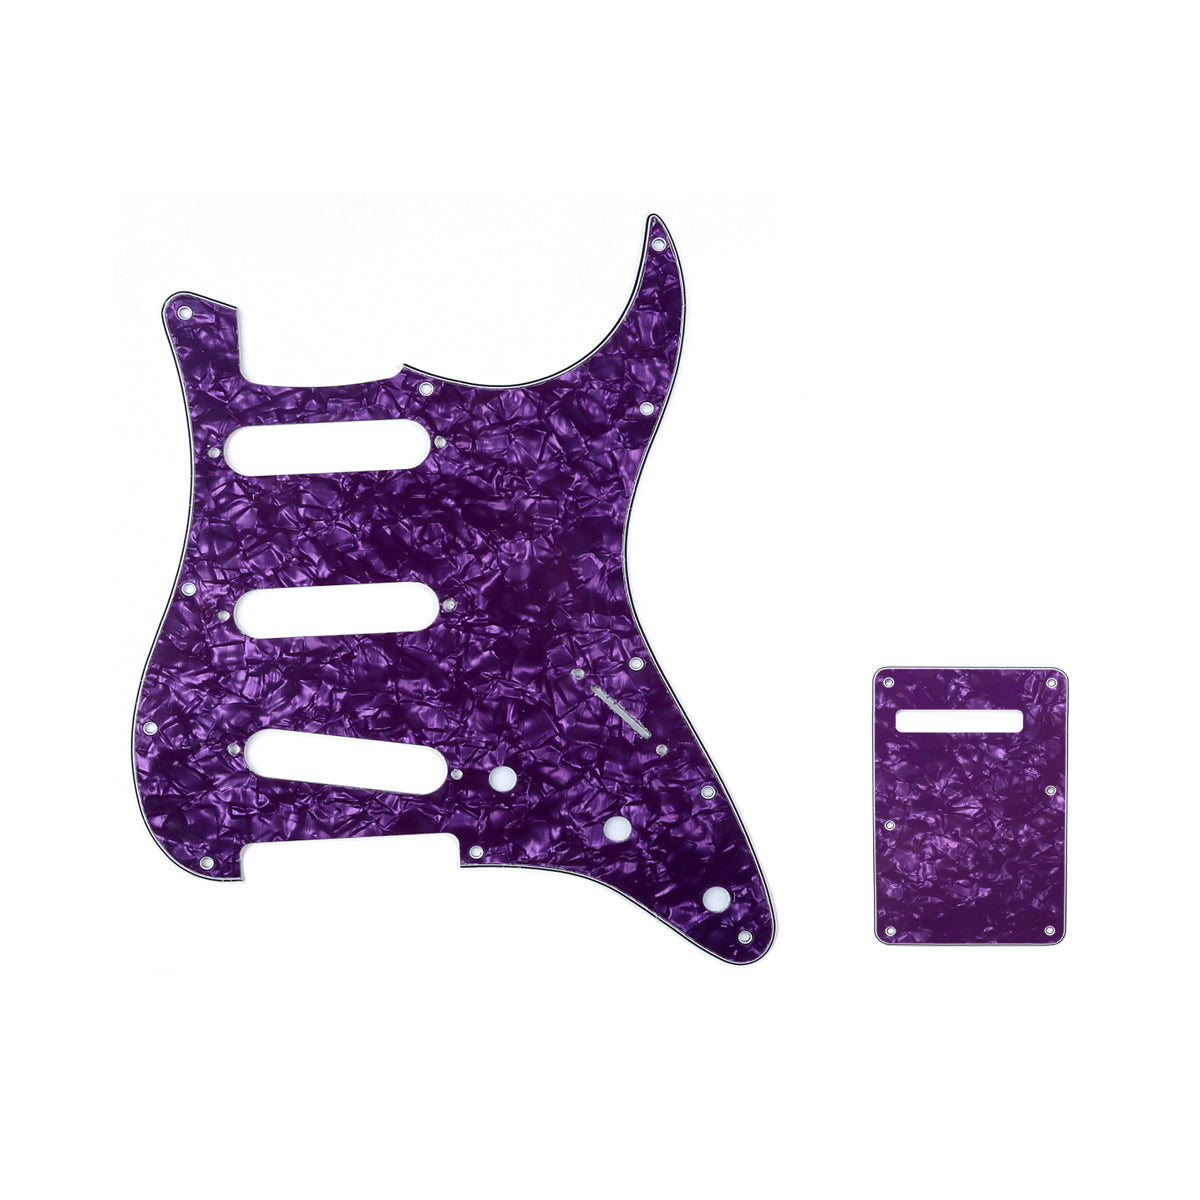 Musiclily SSS 11 Hole Strat Guitar Pickguard and BackPlate Set for Fender USA/Mexican Standard Stratocaster Modern Style, 4Ply Purple Pearl